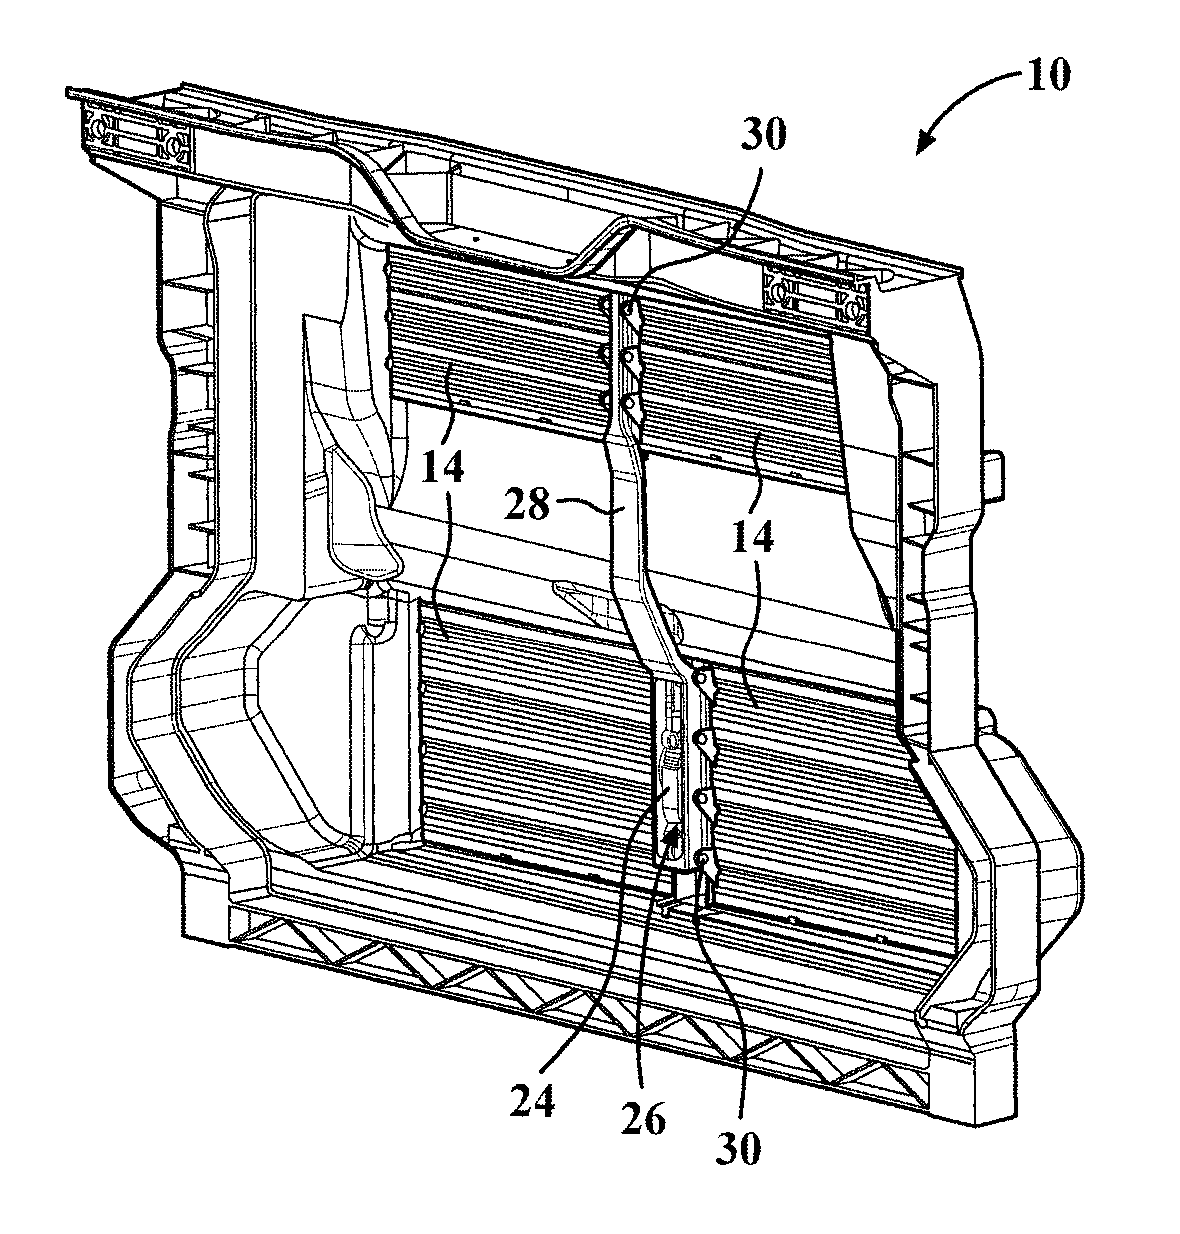 Vehicle engine compartment louver carrier with integrated ducting